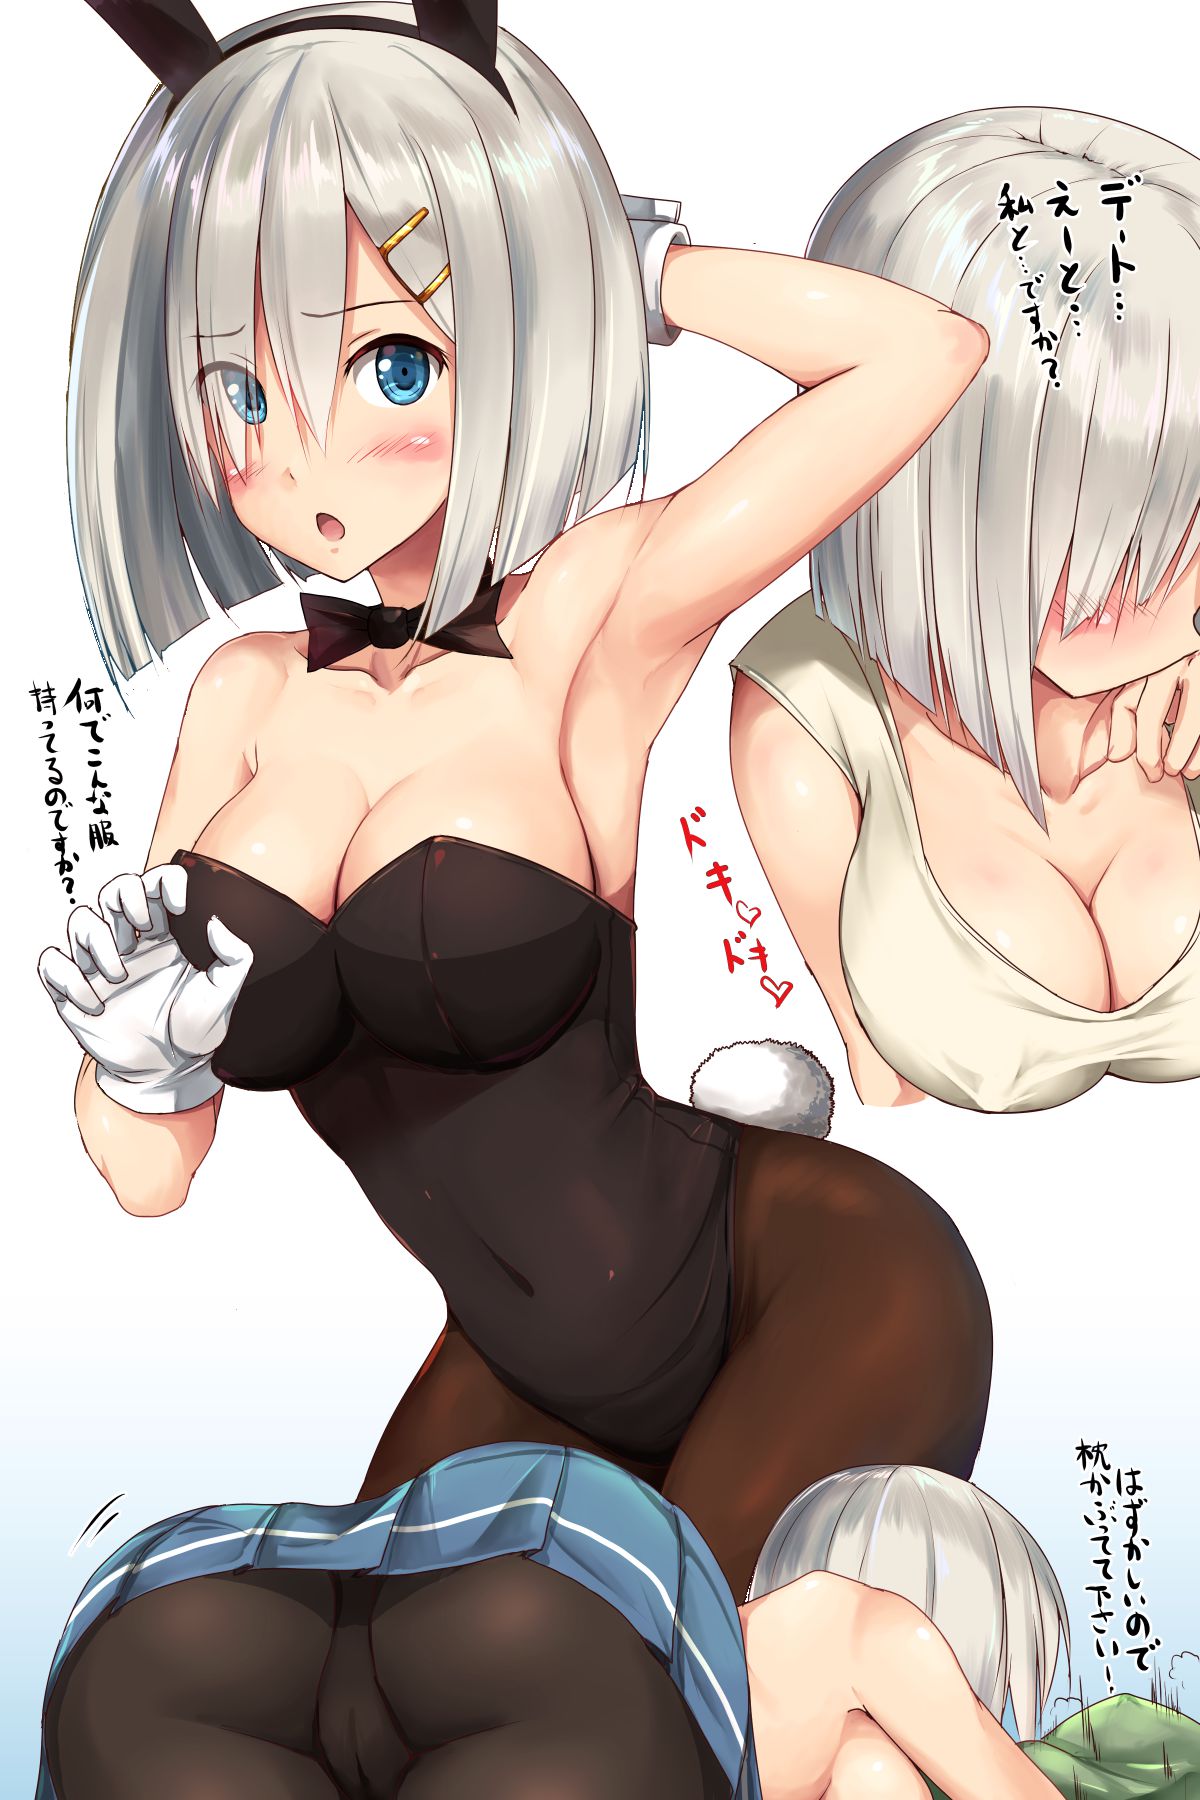 [Ship it] hamakaze erotic pictures so this overwhelming cuteness! 14